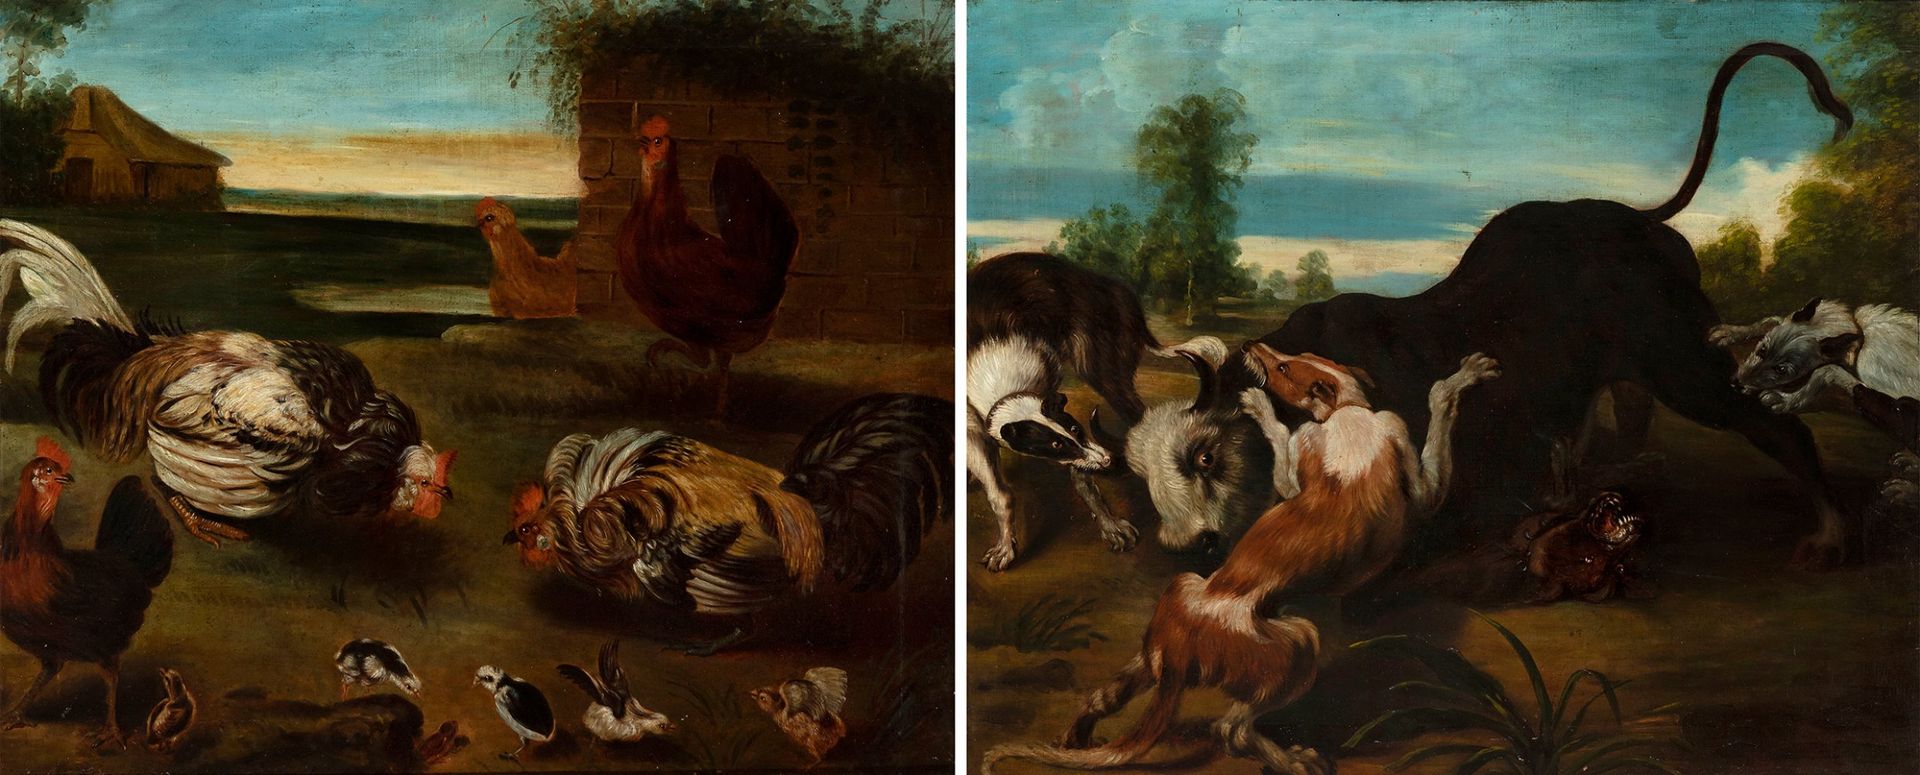 Null Flemish school, 18th century.
"Farmyard scene" and "Dogs and bull".
Pair of&hellip;